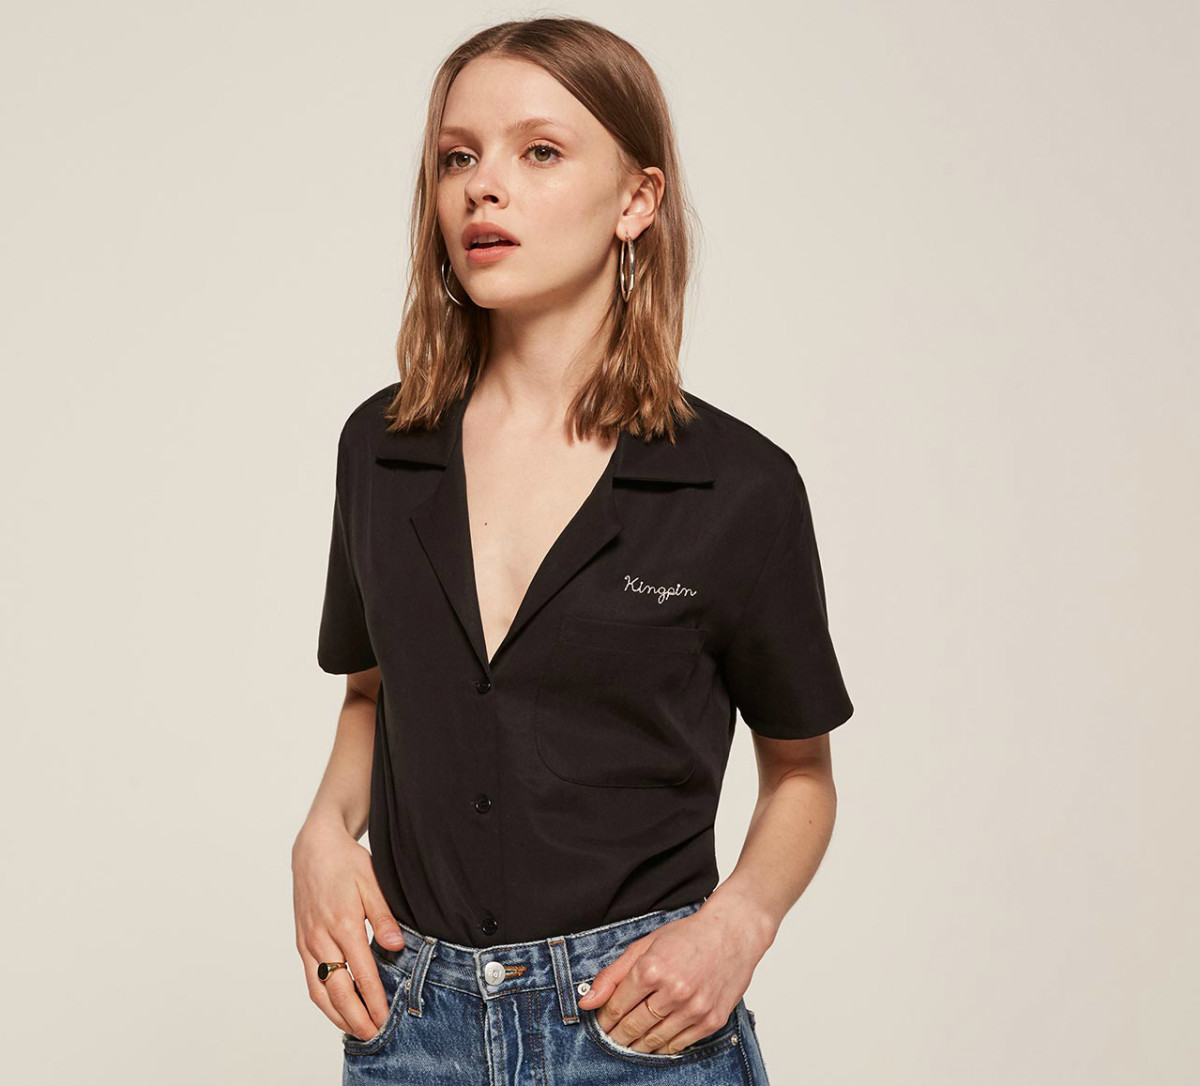 Reformation Kingpin top, $67 (from $168), available at Reformation.